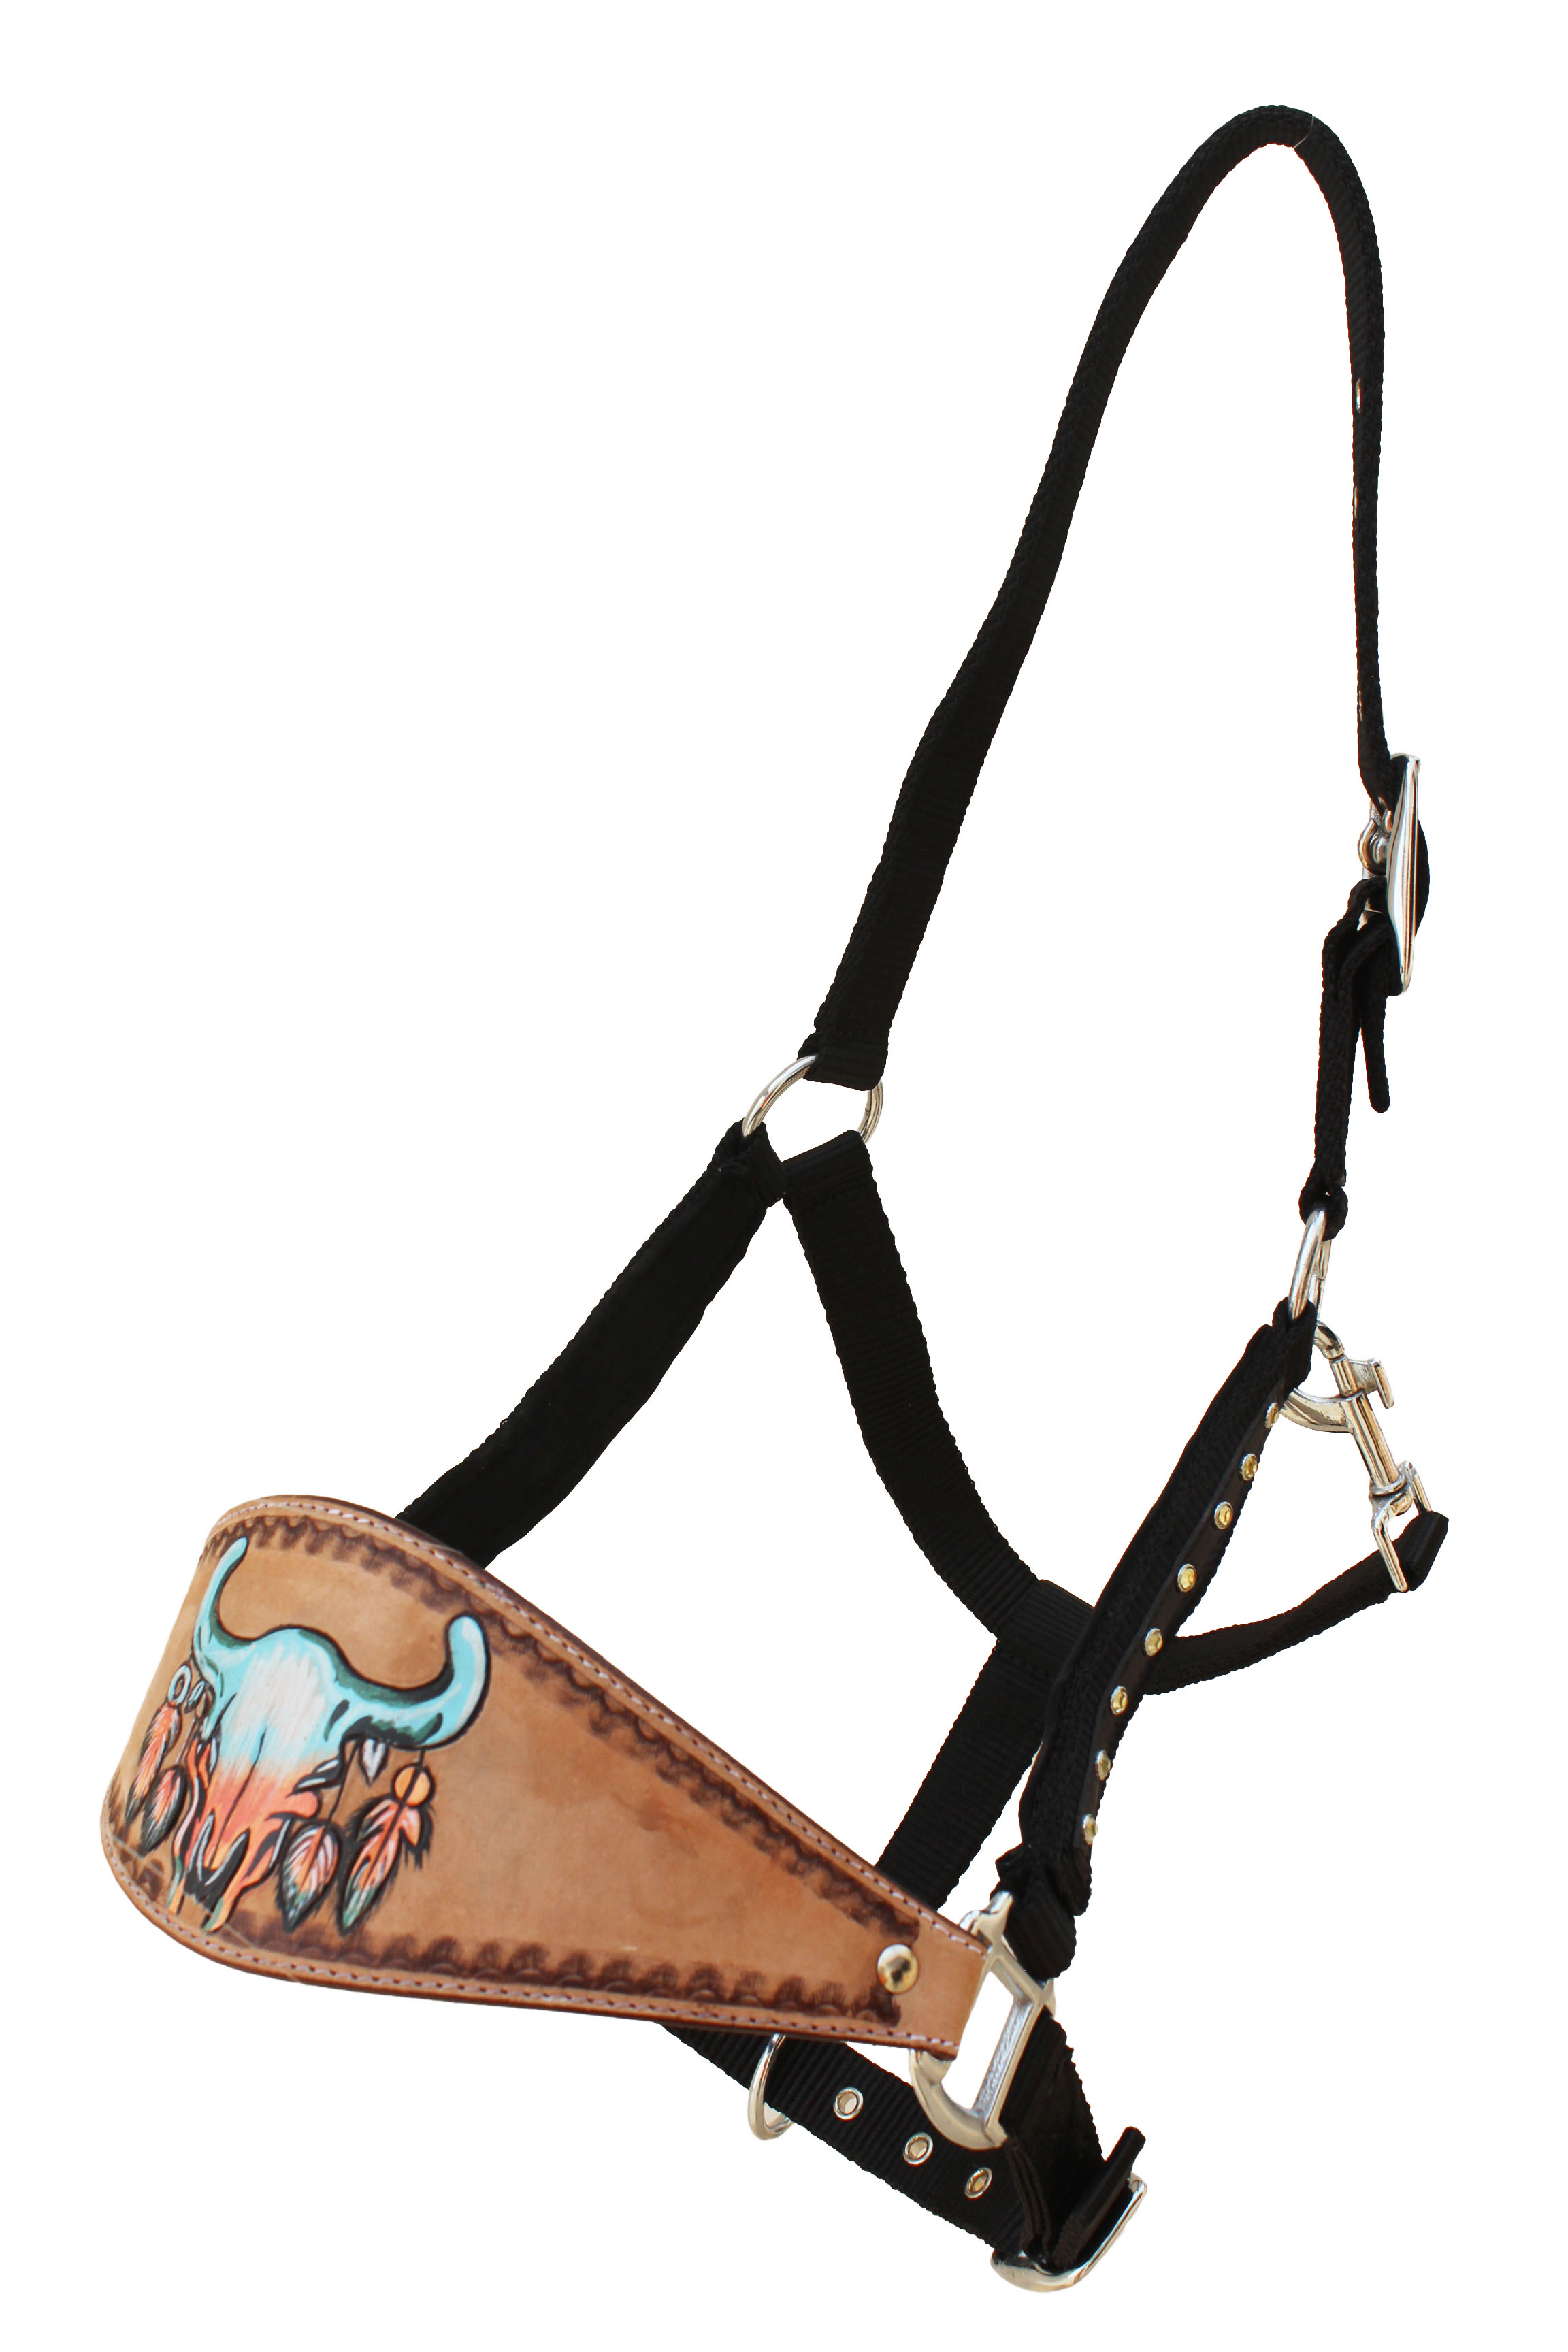 Western Horse Bronc Halter Turquoise Nylon with Fancy Tooled Leather Nose Band